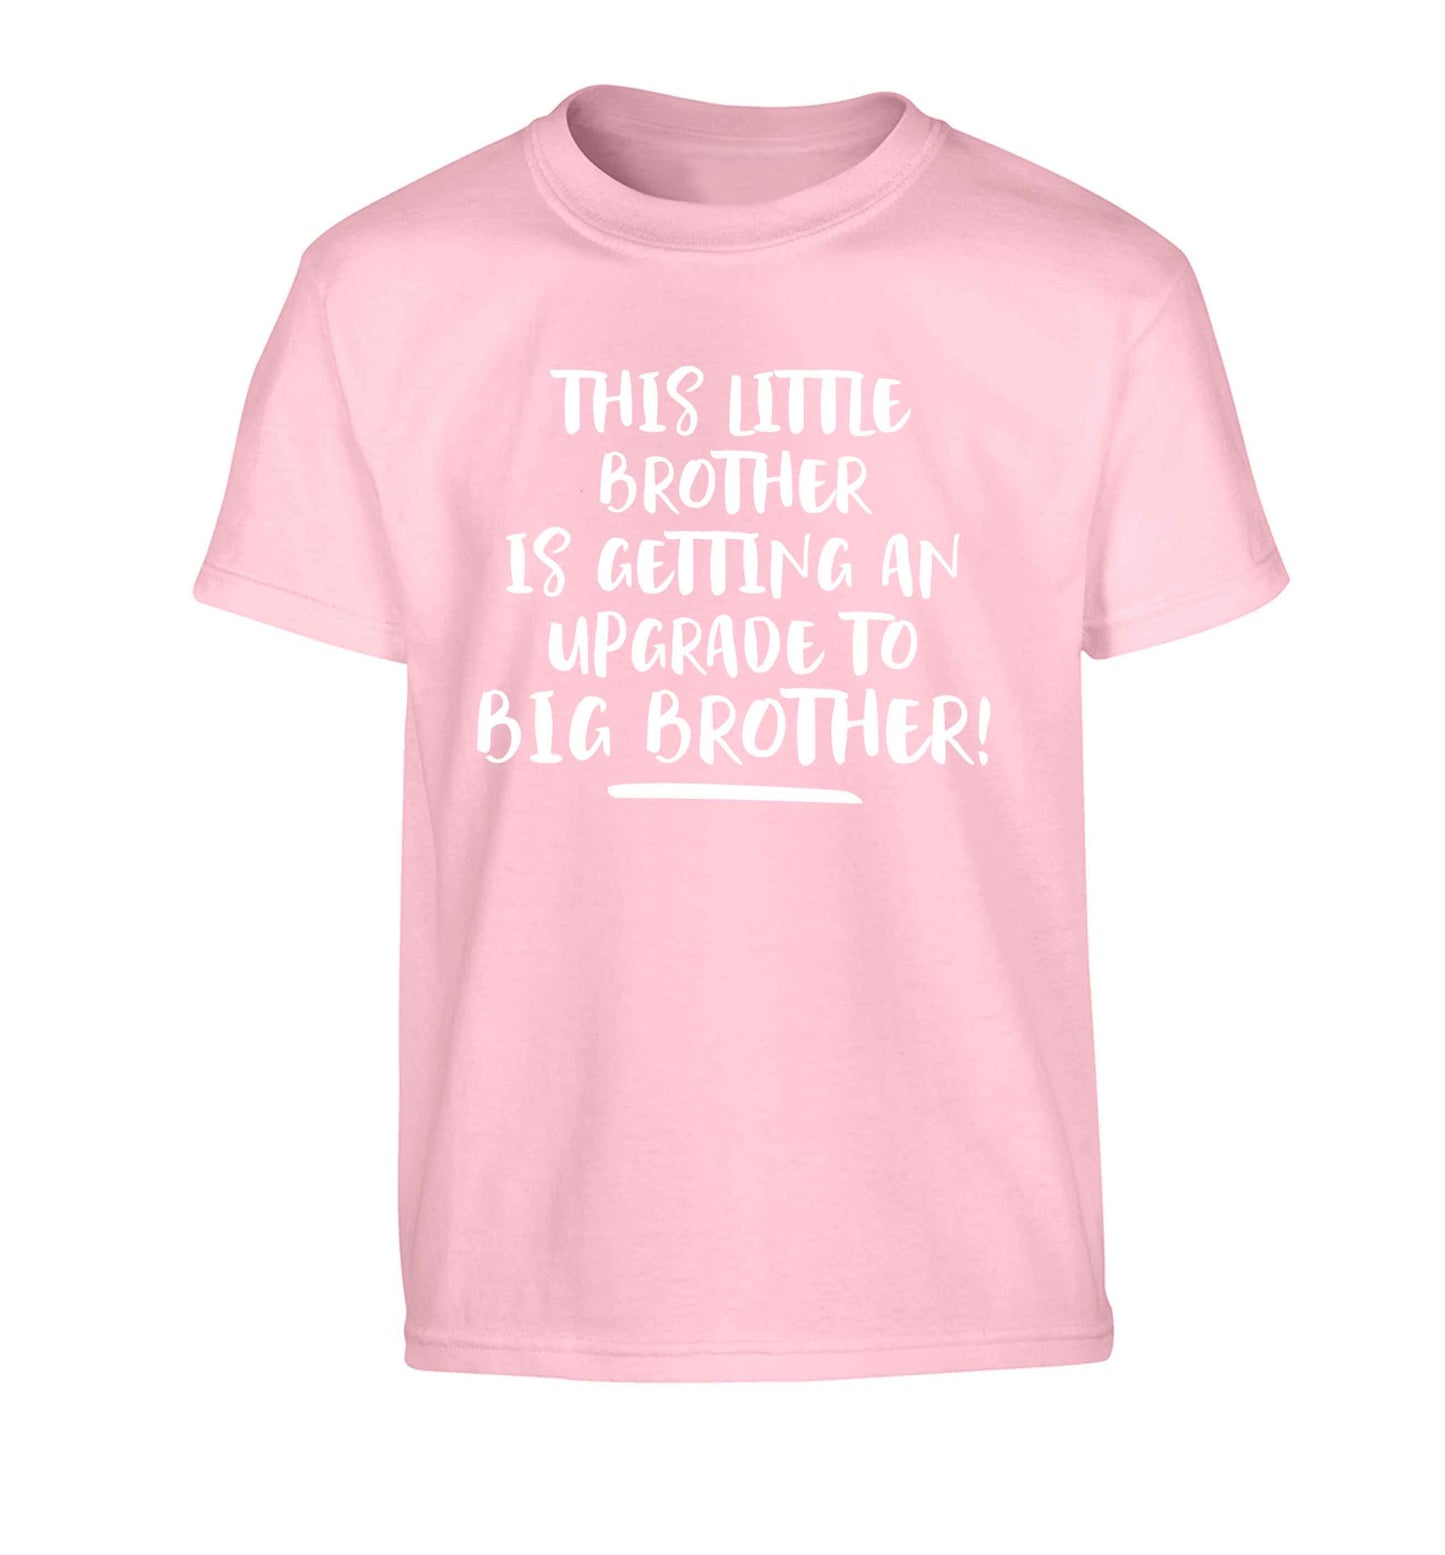 This little brother is getting an upgrade to big brother! Children's light pink Tshirt 12-13 Years